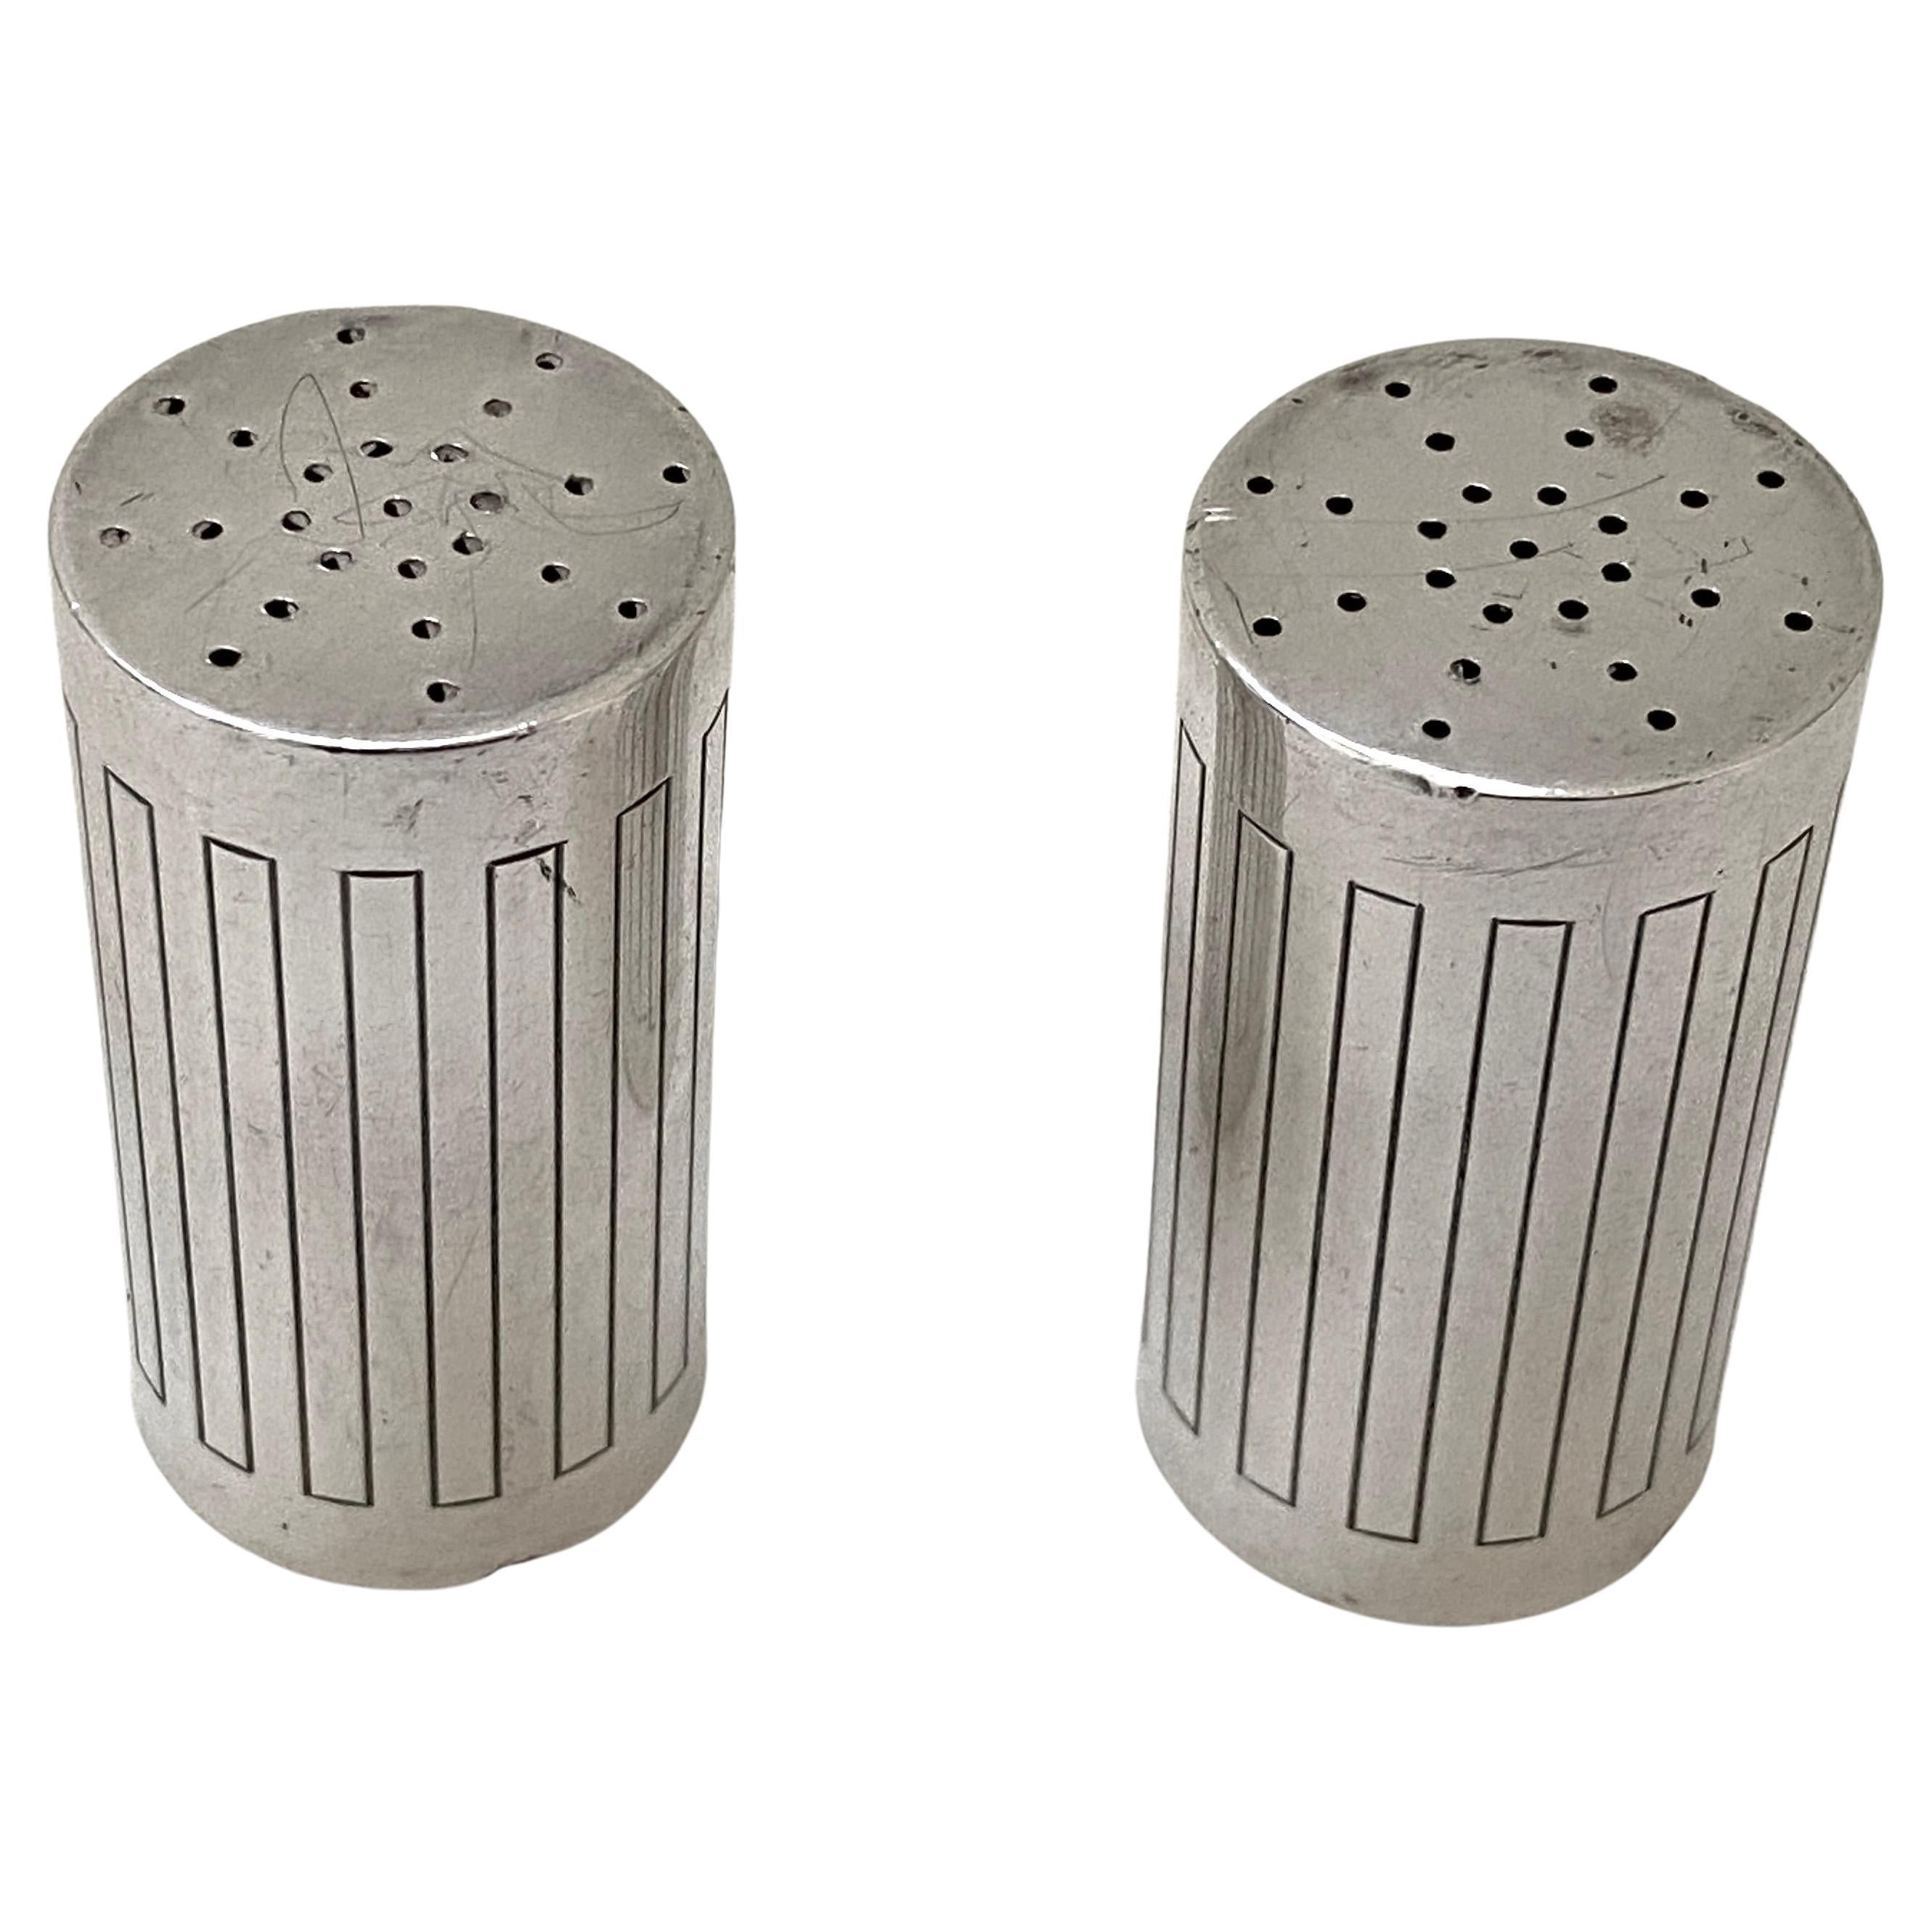 This stylish set of Georg Jensen salt shakers are in the No. 902 Bernadotte pattern, and pattern was designed by Sigvard Bernadotte. 

Note: Each piece bears impressed company marks for Georg Jensen, Sterling, Denmark, Sigvard Bernadotte, 902 on the